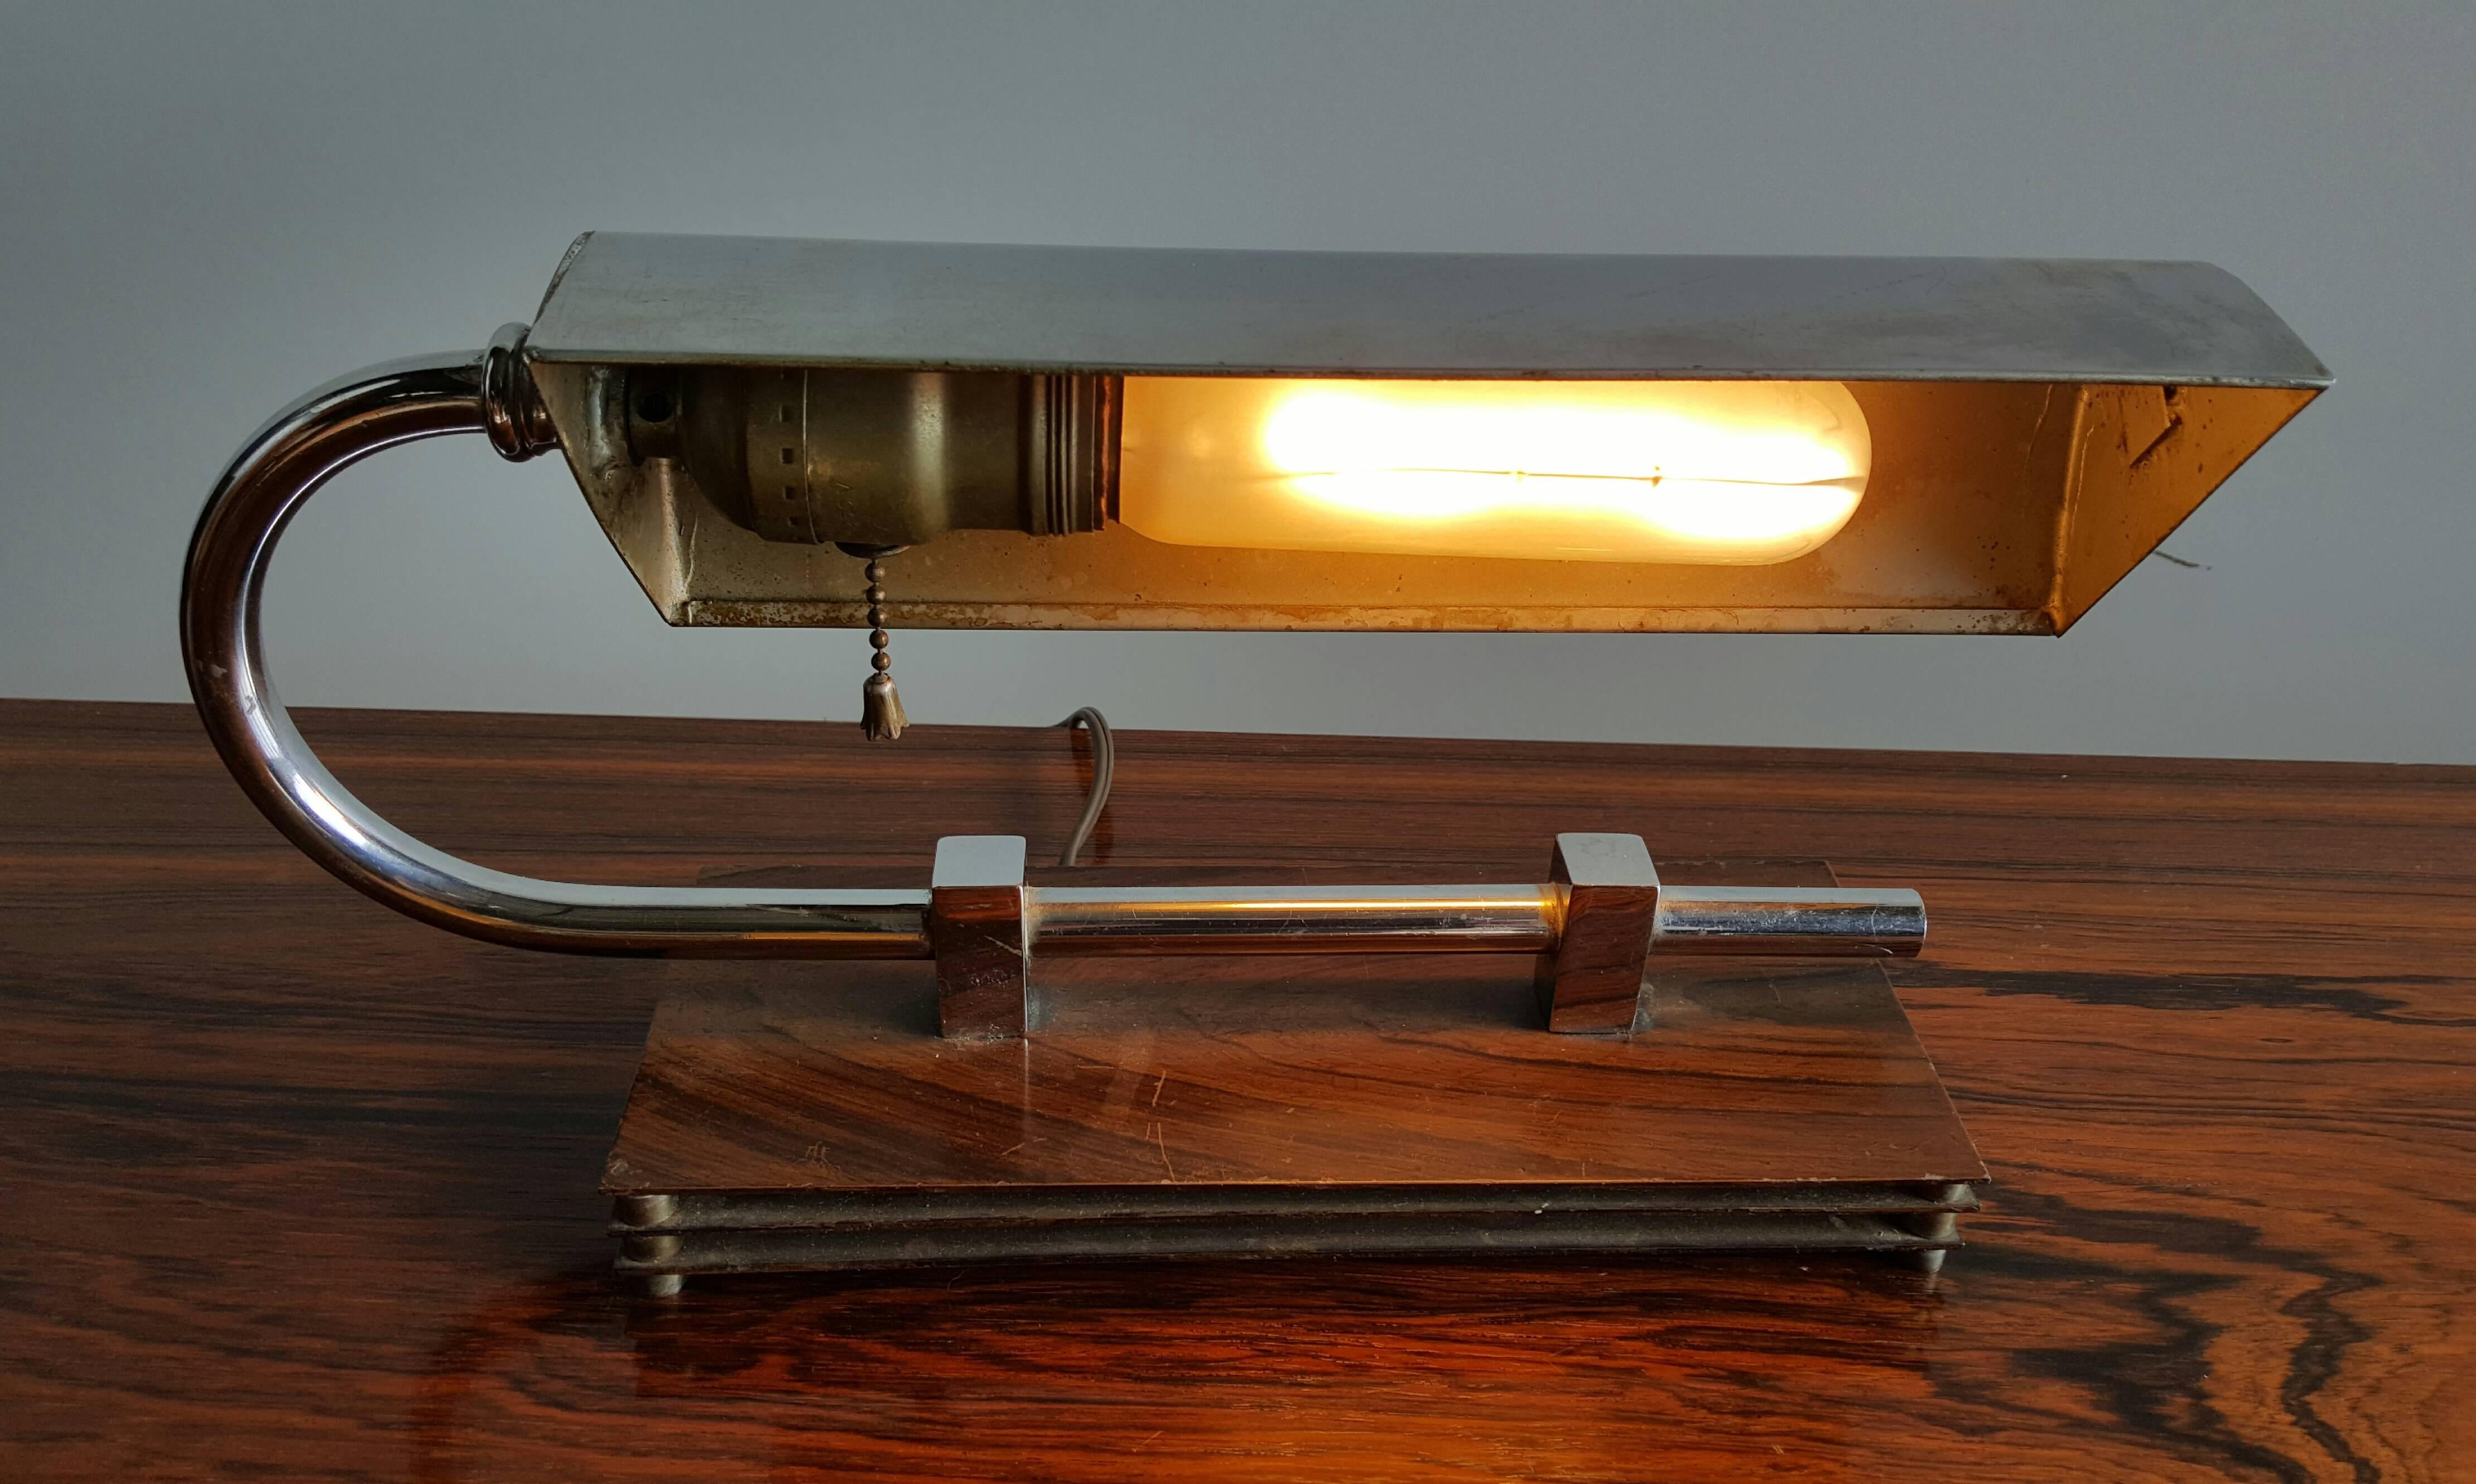 Art Deco machine age chrome desk lamp. Manner of gilbert Rhode. Classic Art Deco, 1930s design. Triple stacked metal base separated by machined steel discs, cantiliver chrome standard with adjustable chrome shade.